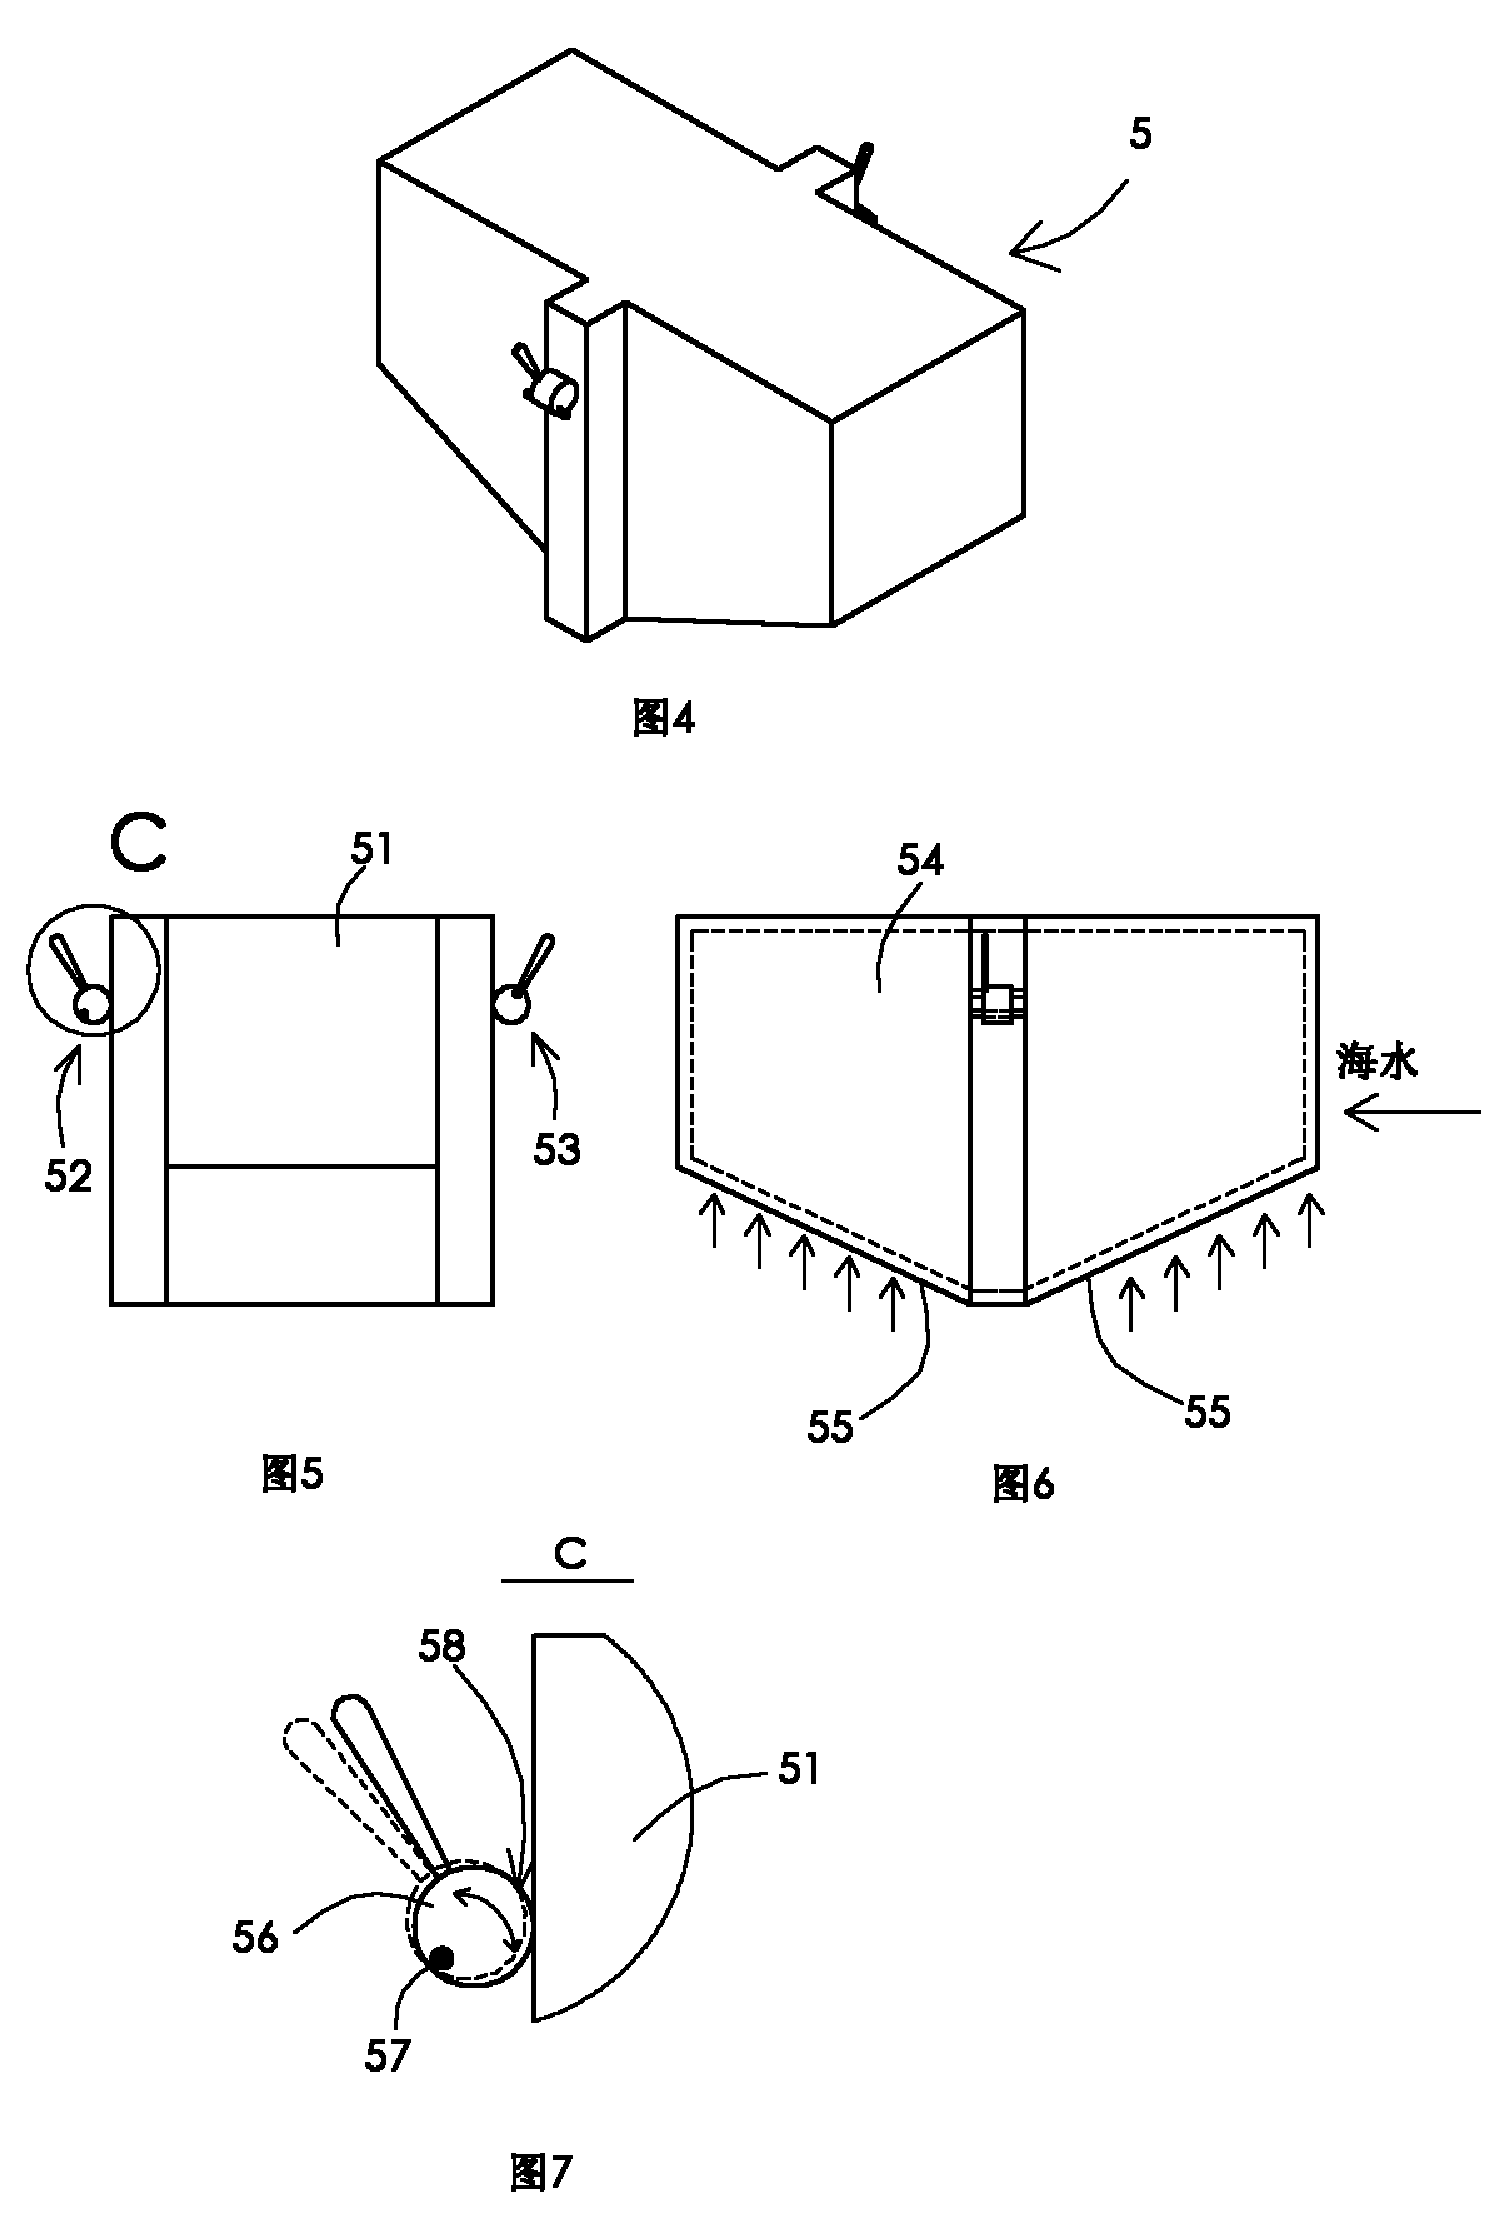 Method for making ice and salt and desalinating sea water with natural resources